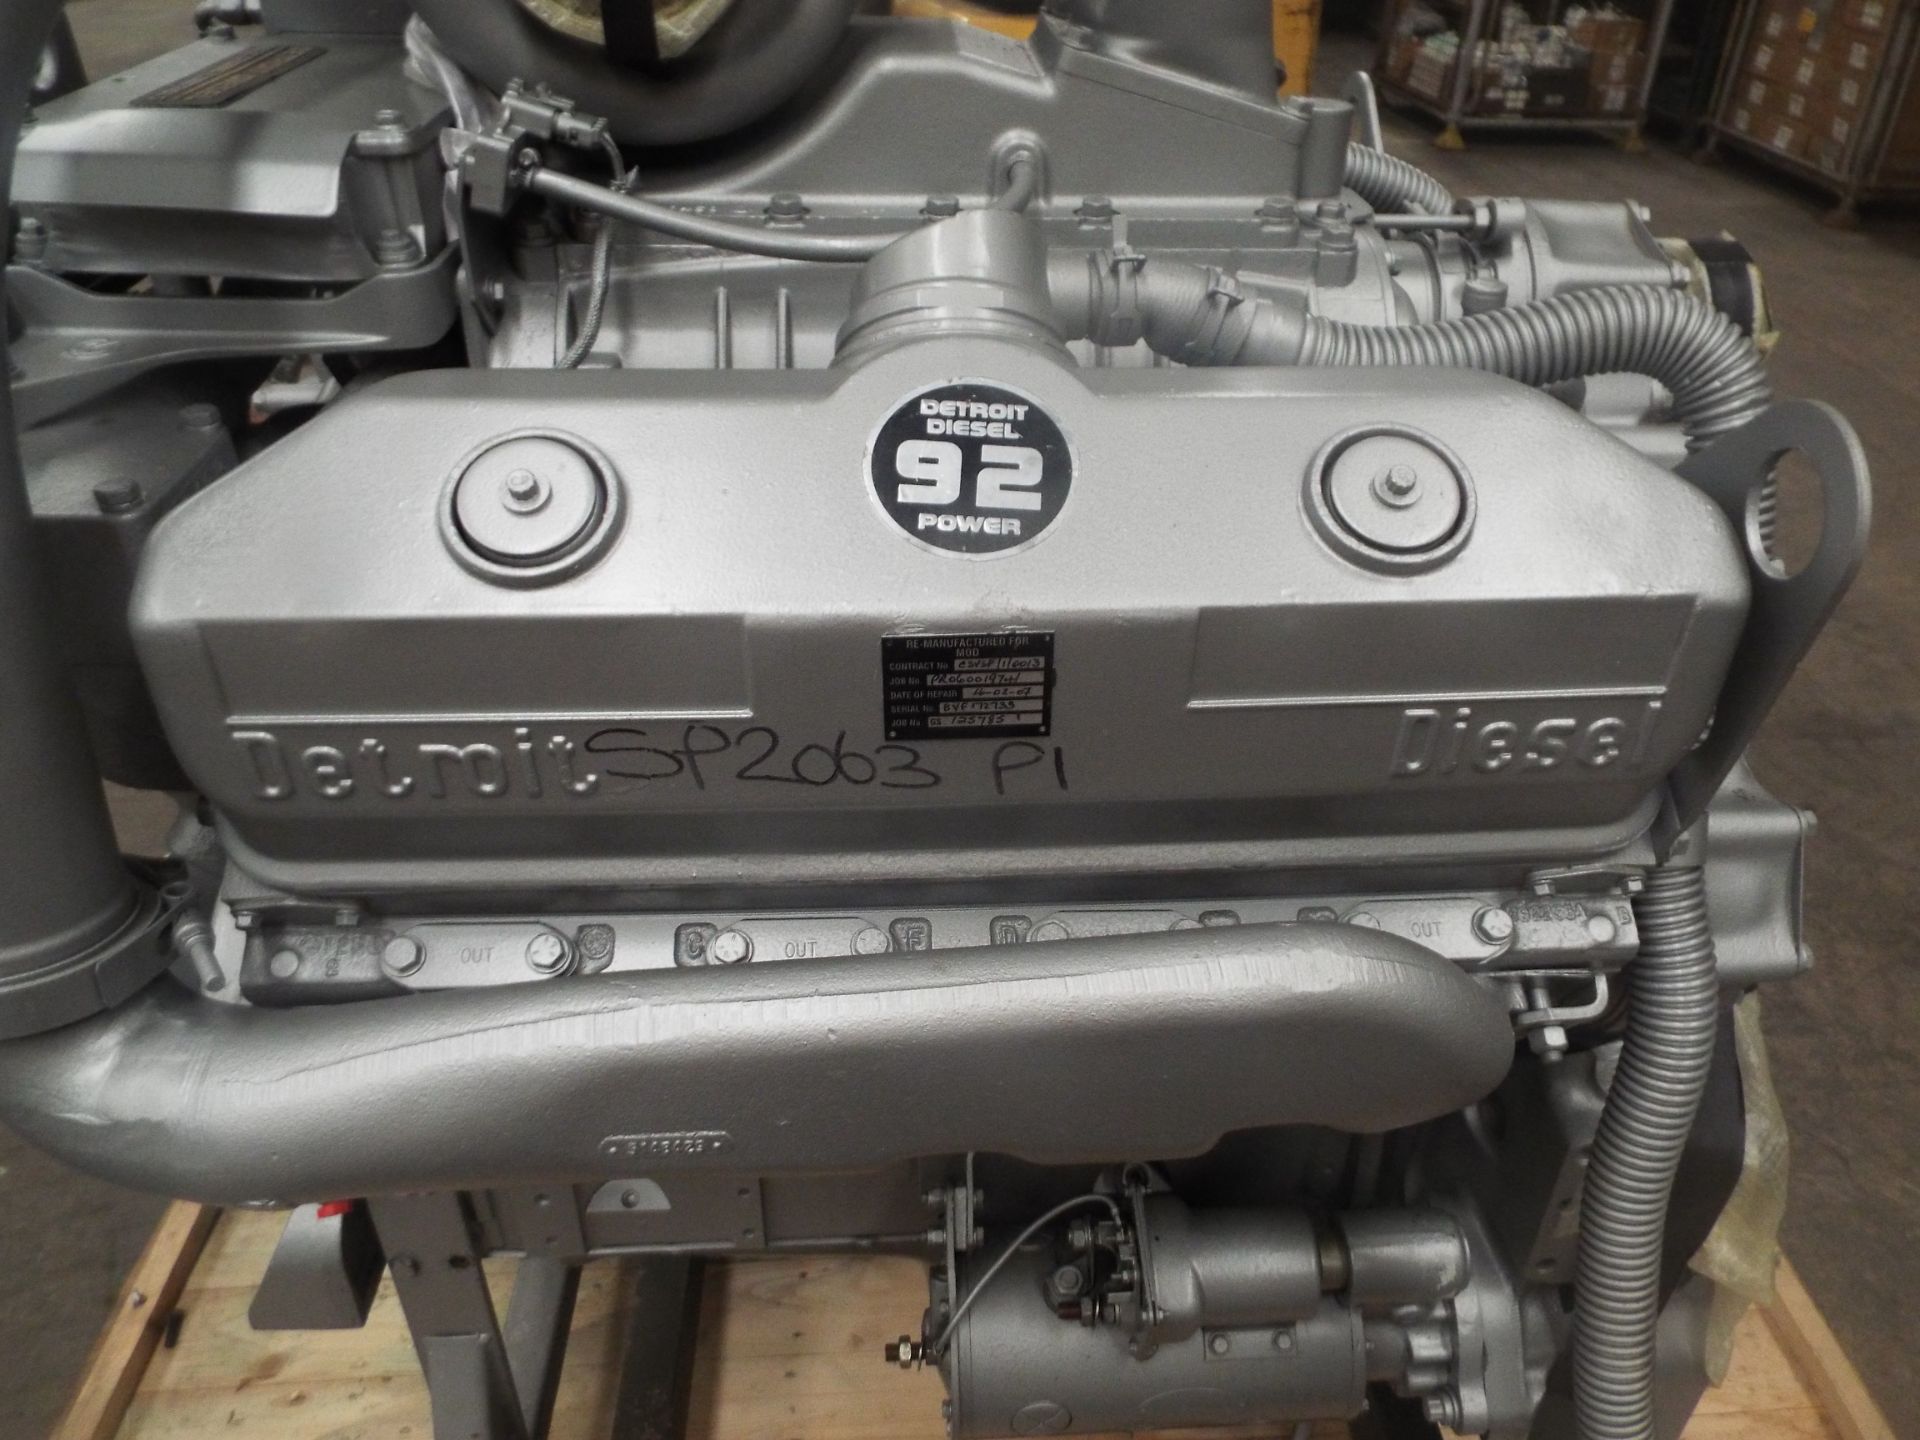 Detroit 8V-92TA DDEC V8 Turbo Diesel Engine Complete with Ancillaries and Starter Motor - Image 10 of 20